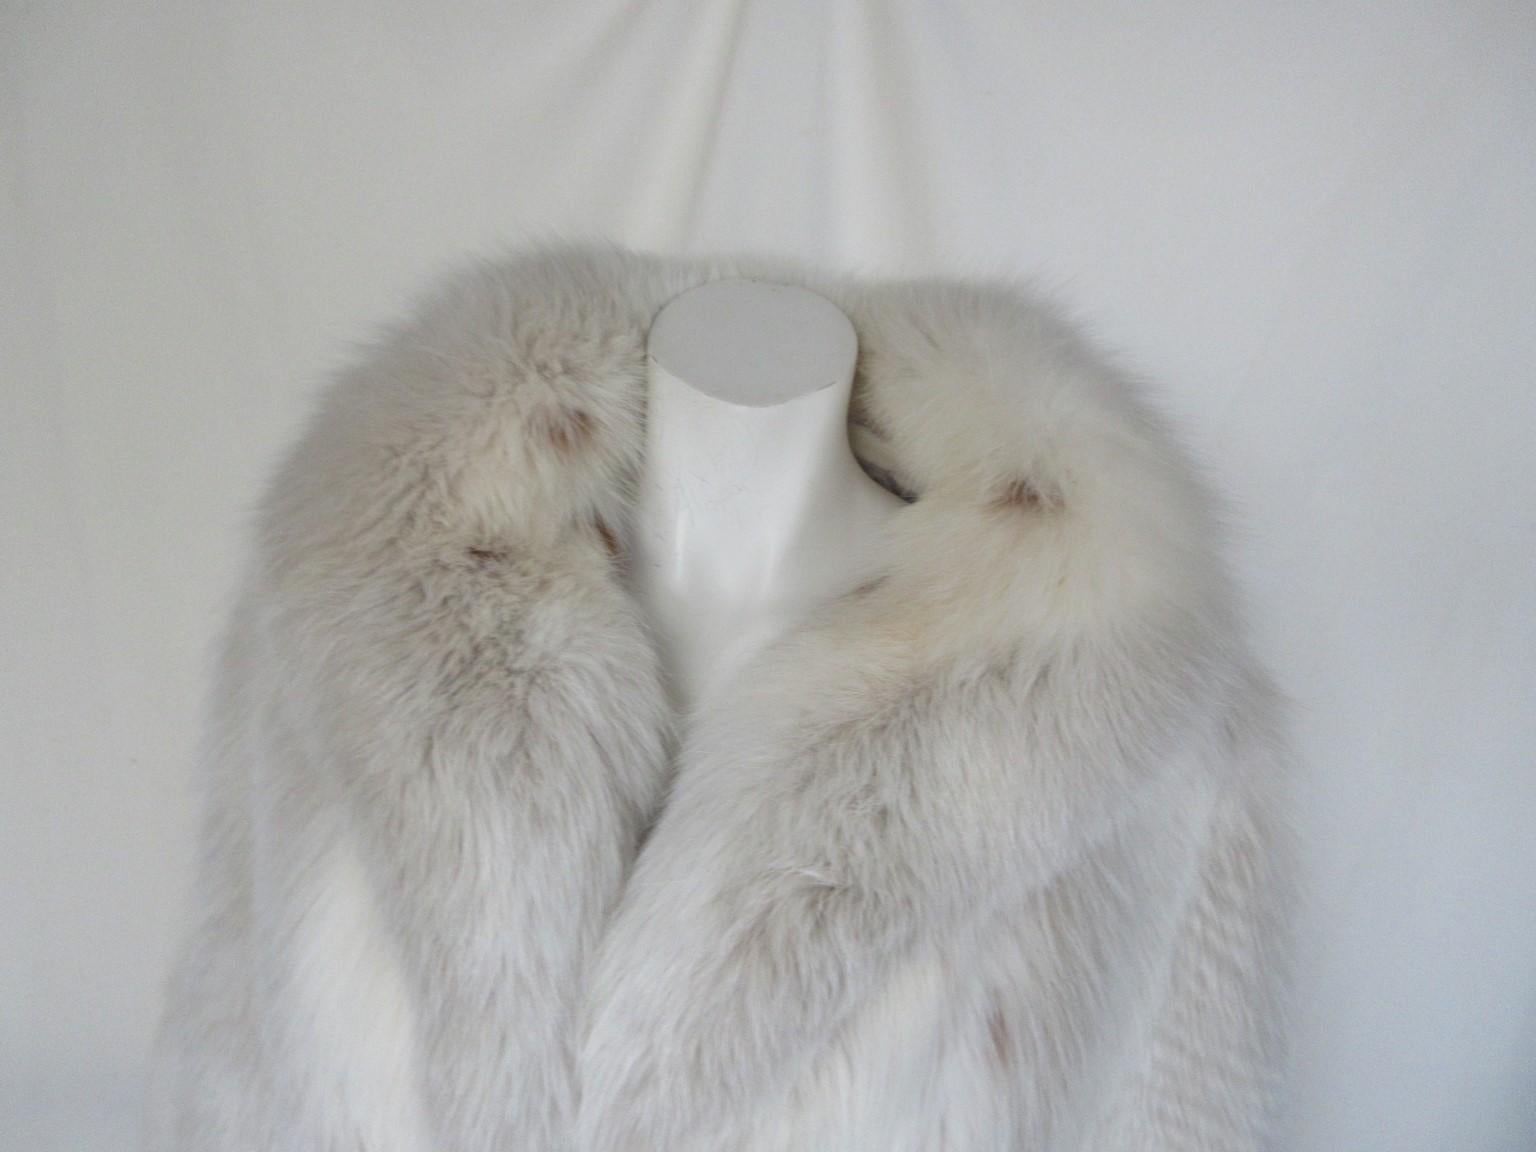 Exclusive Fox fur long coat

We offer more exclusive fur items. view our frontstore

 Details:
The coat is snow white with spots in Lynx style
With 2 pockets and 3 closing hooks 
fully lined
1 inside pocket
Fox fur feels very soft
Pristine